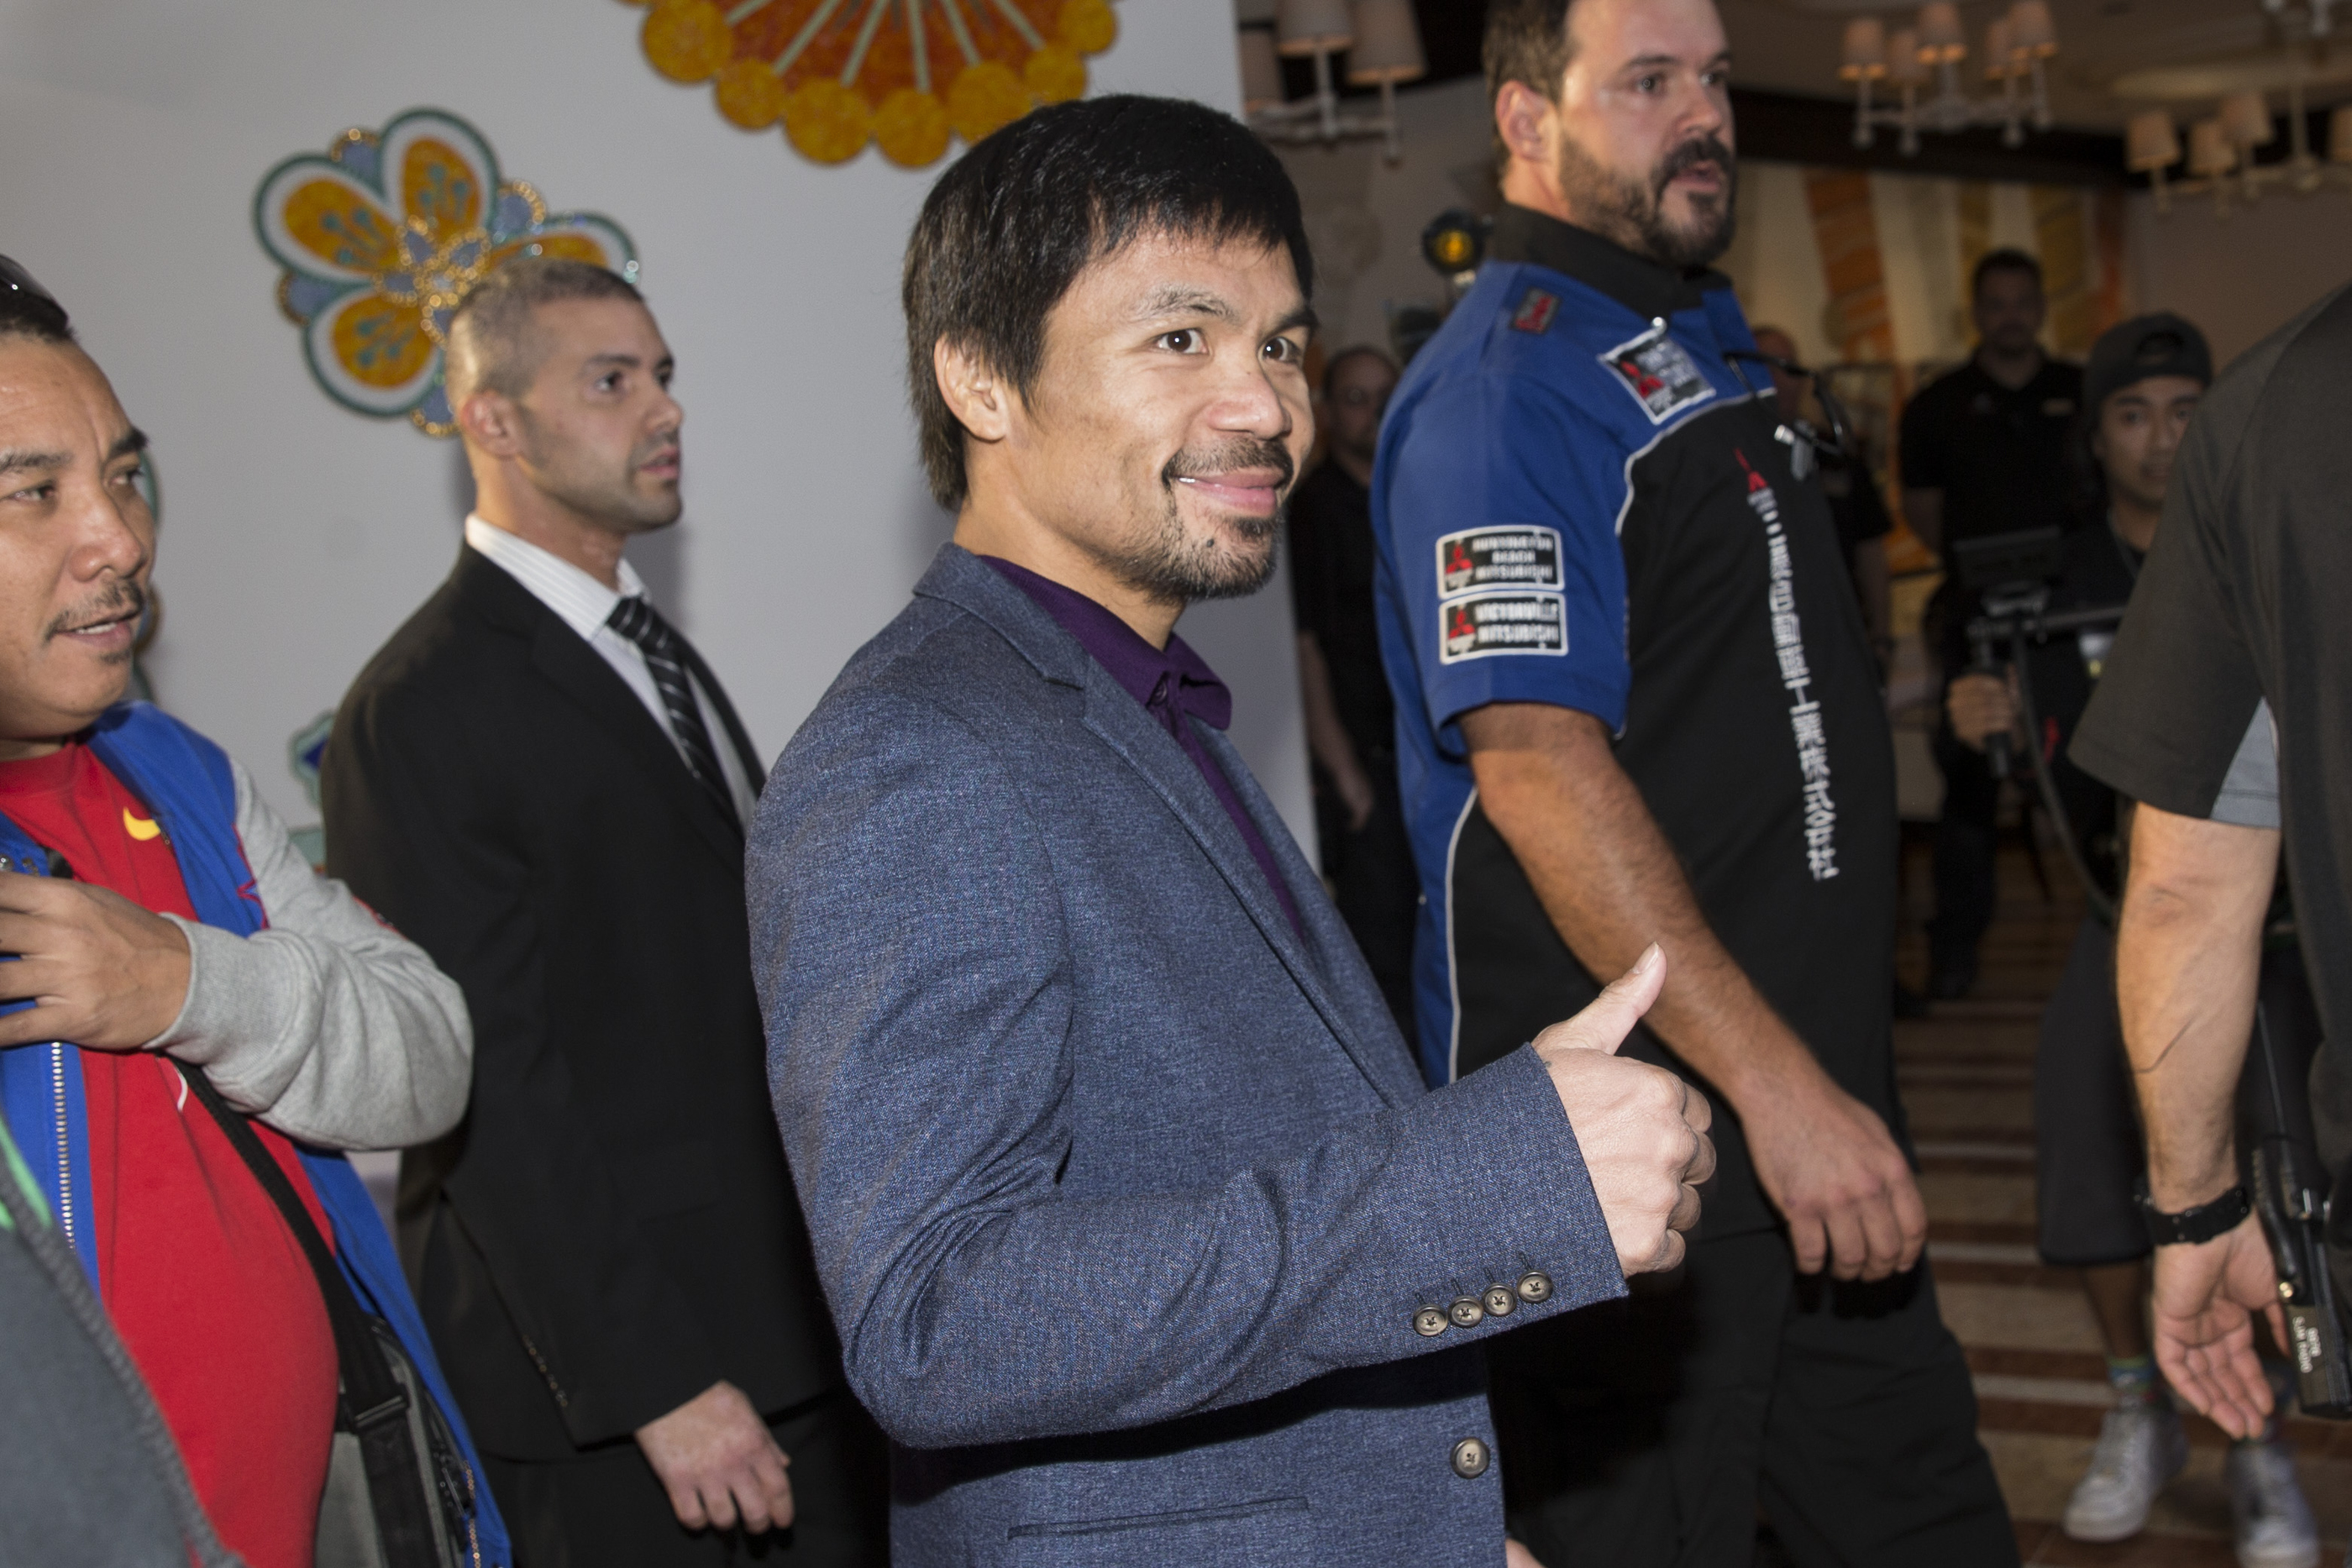 Boxer Manny Pacquiao makes his "Grand Arrival" to the Wynn hotel-casino on Tuesday, Nov. 1, 2016, in Las Vegas. Pacquiao is scheduled to fight Jessie Vargas on Saturday night at the Thomas & Mack Center. (Erik Verduzco/Las Vegas Review-Journal via AP)